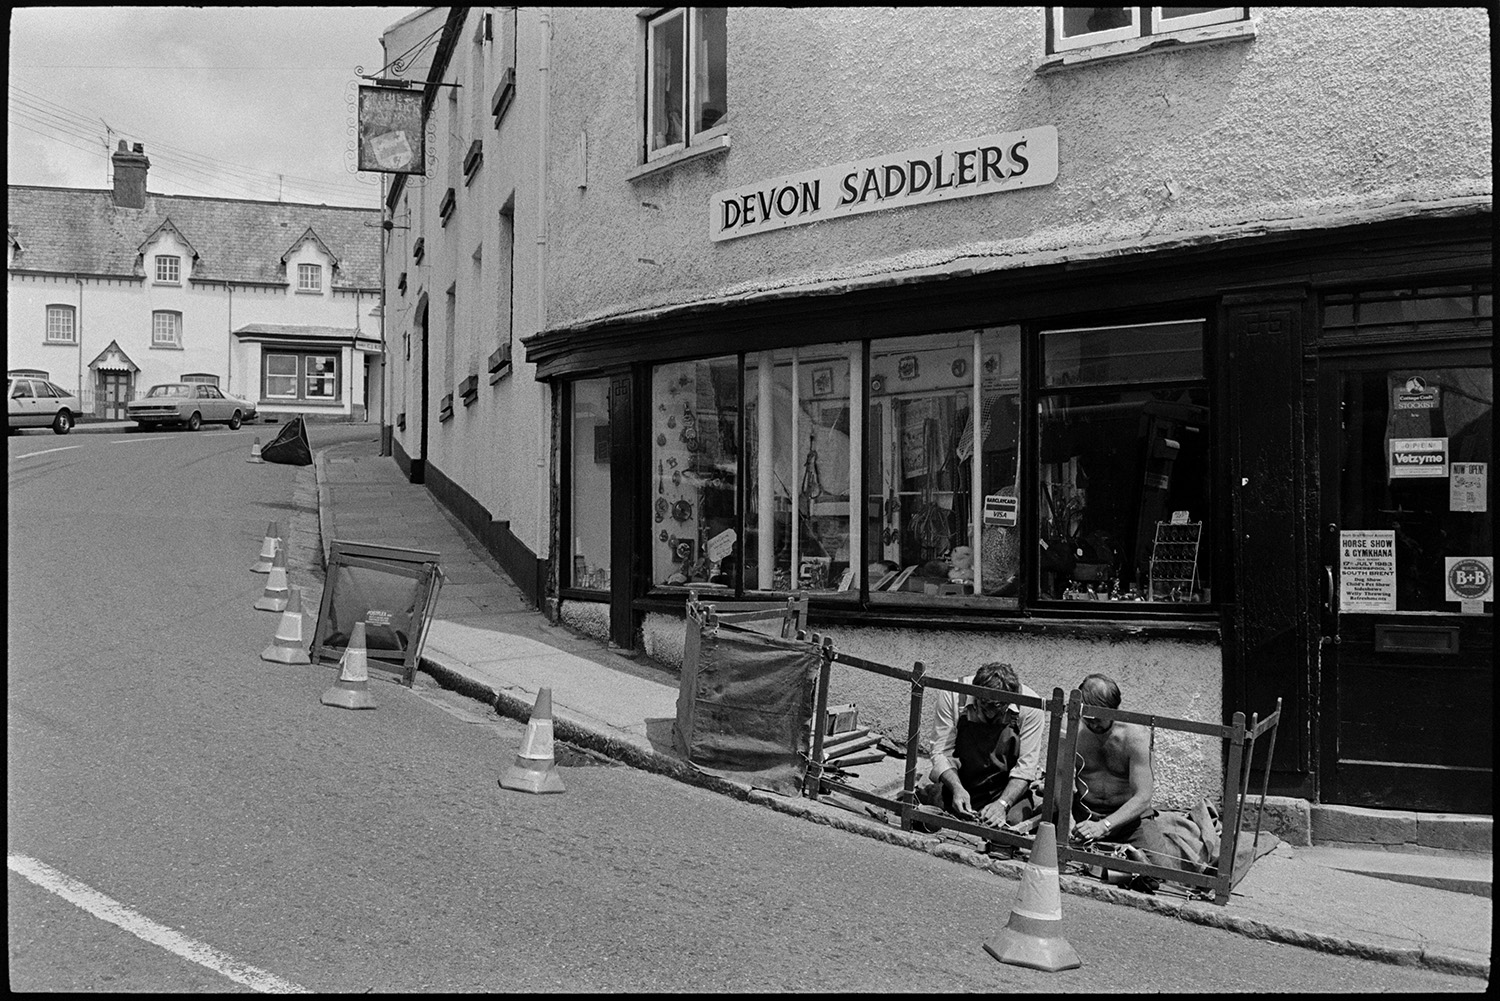 Electrical engineers working in pavement manhole in street.
[Engineers working on wires in open manholes in the pavement outside the Devon Saddlers shop in Market Street, Hatherleigh. Traffic cones are positioned by the pavement.]